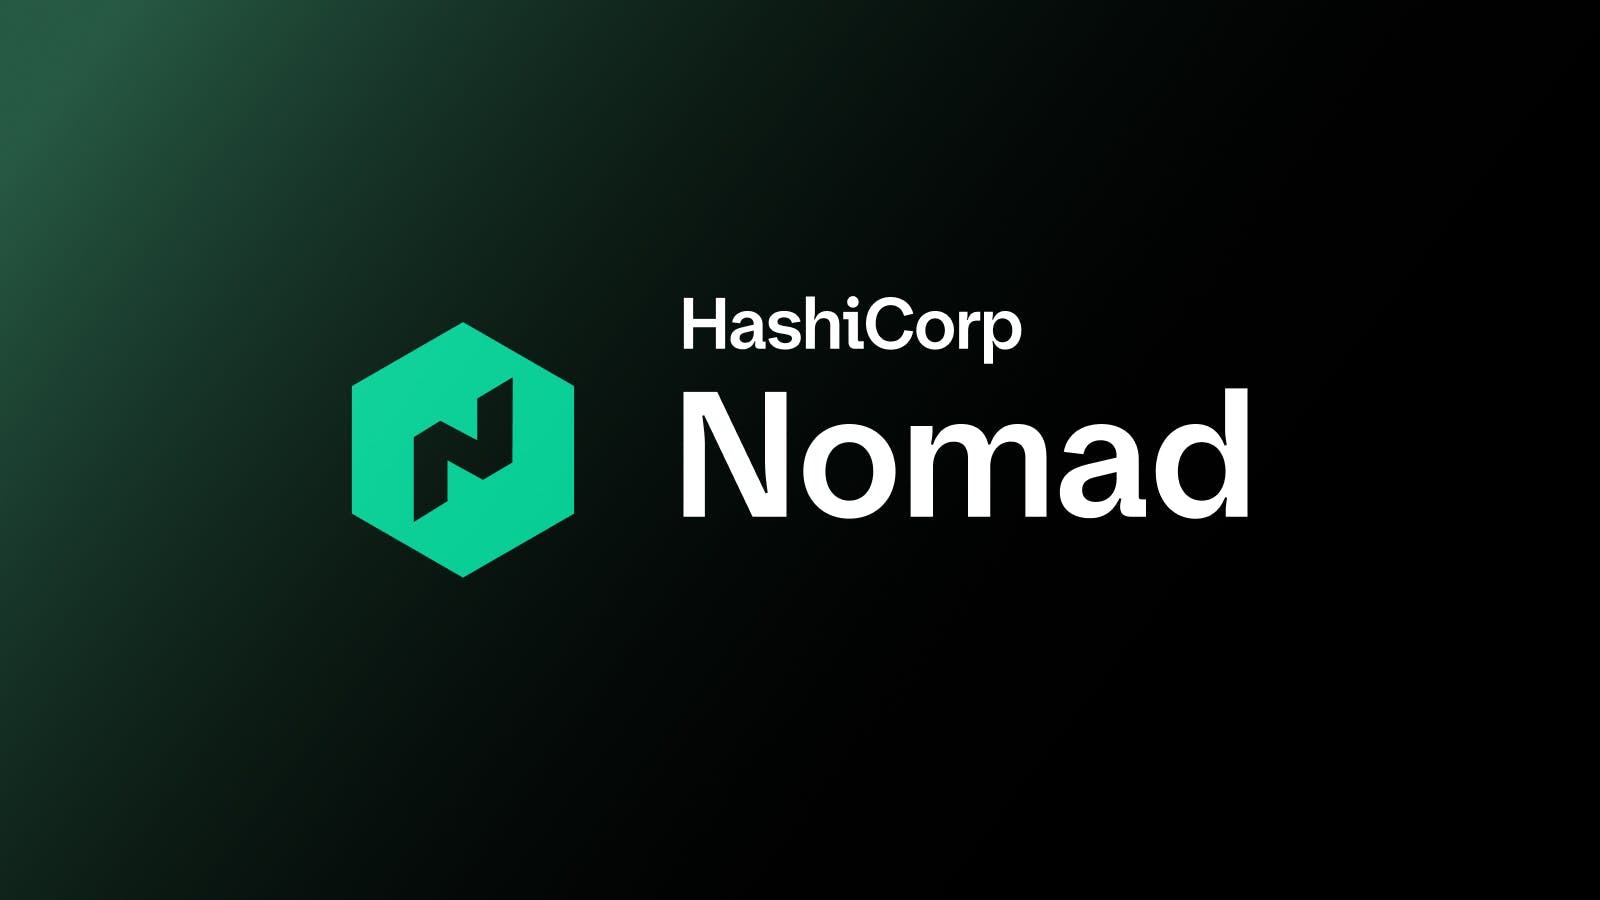 Managing Resources for Workloads with Nomad 1.1